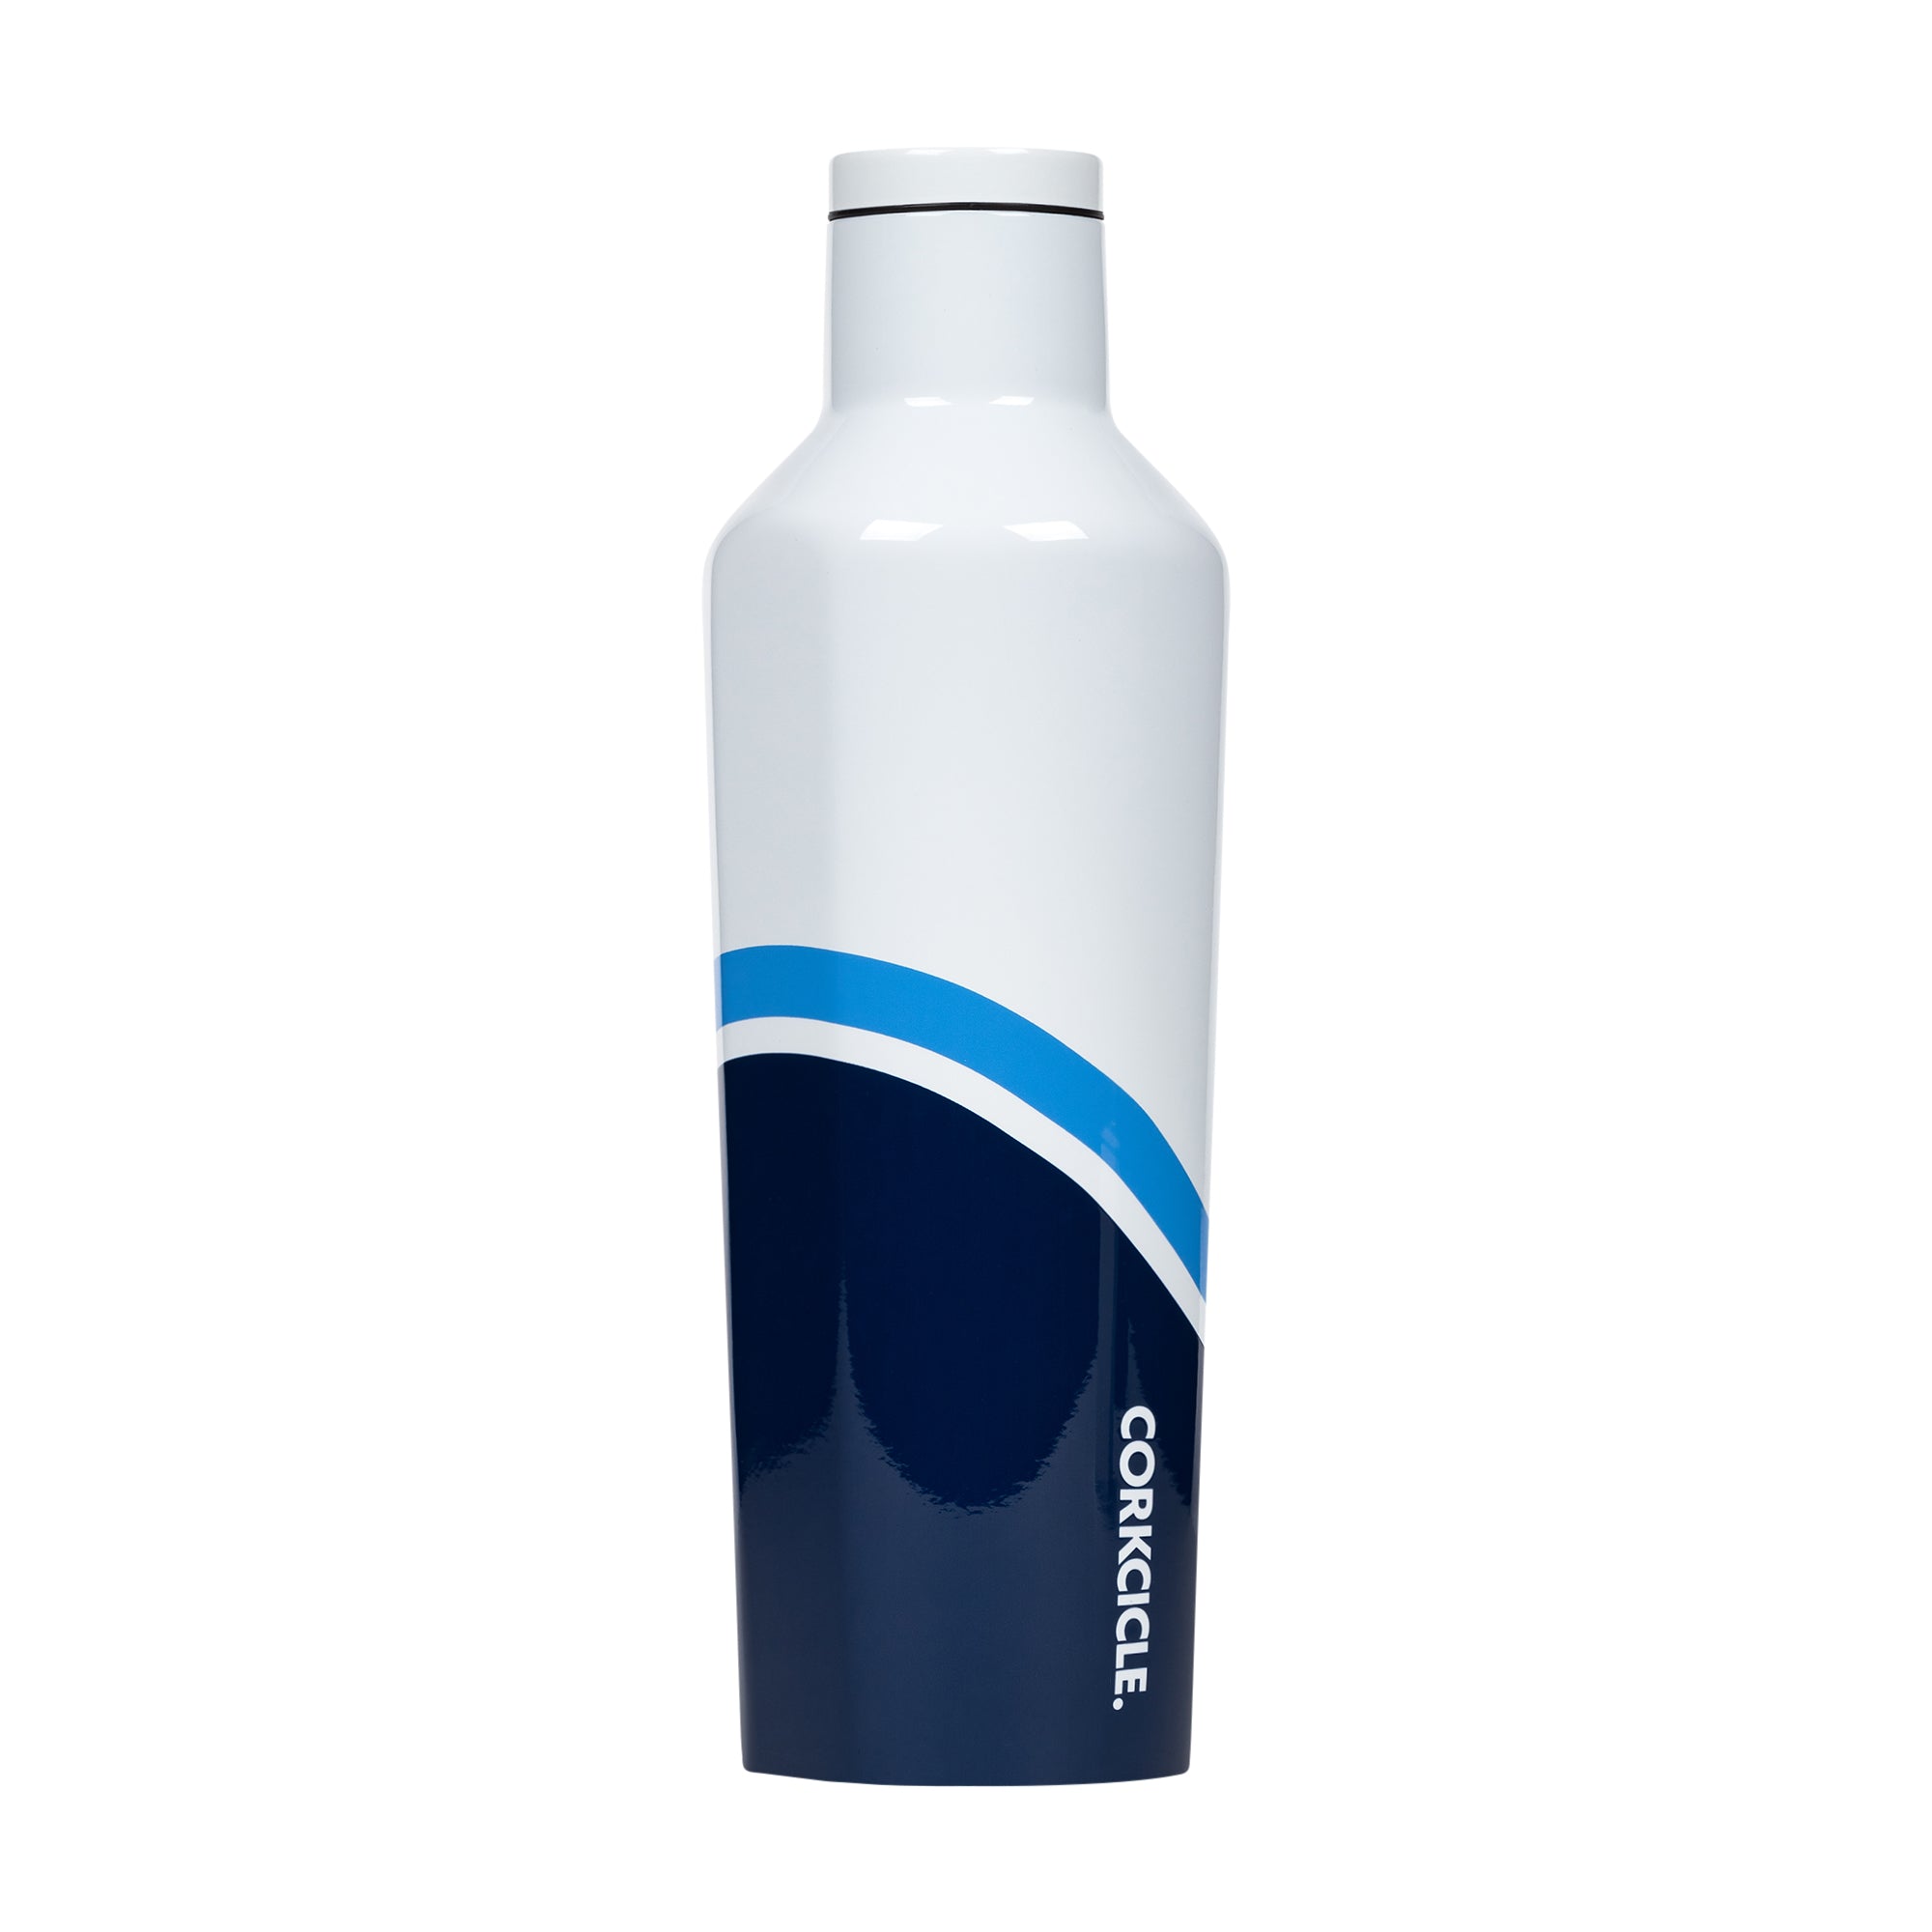 CORKCICLE *Exclusive* Stainless Steel Insulated Canteen 16oz (475ml) - Regatta Blue